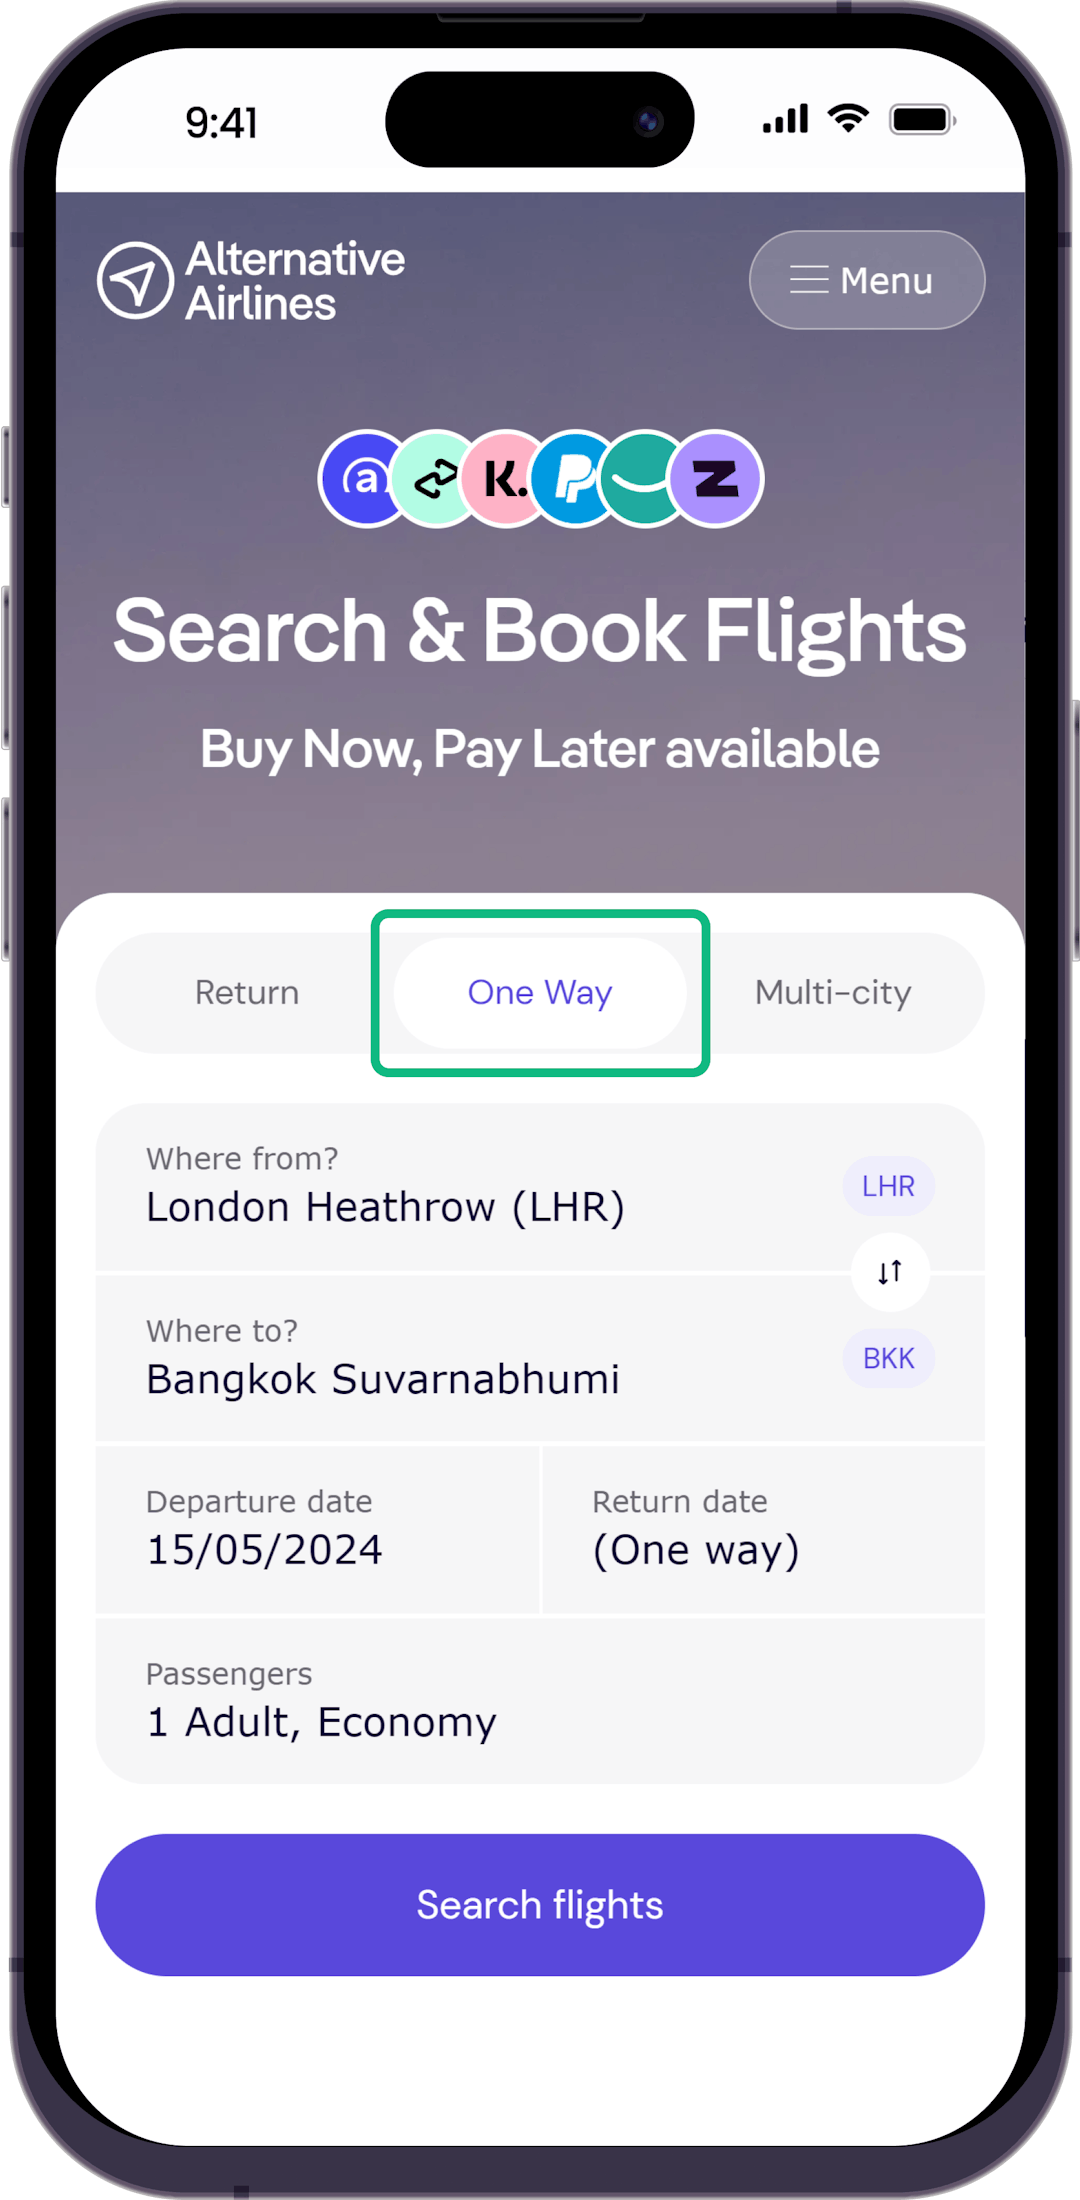 Step 1 - Select one-way flight option and search for flights